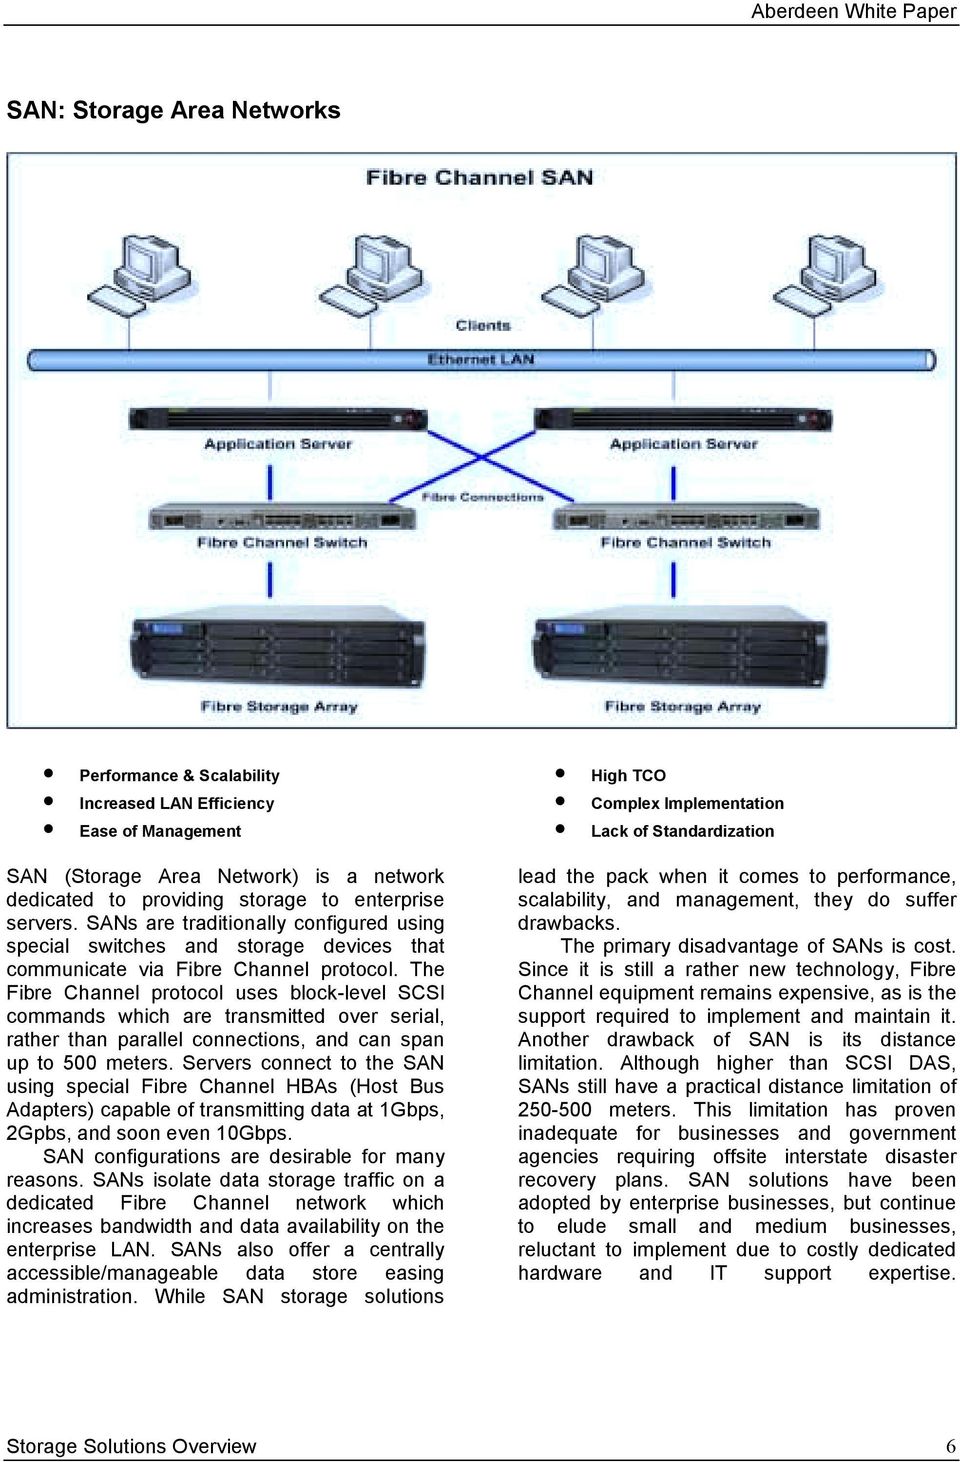 The Fibre Channel protocol uses block-level SCSI commands which are transmitted over serial, rather than parallel connections, and can span up to 500 meters.